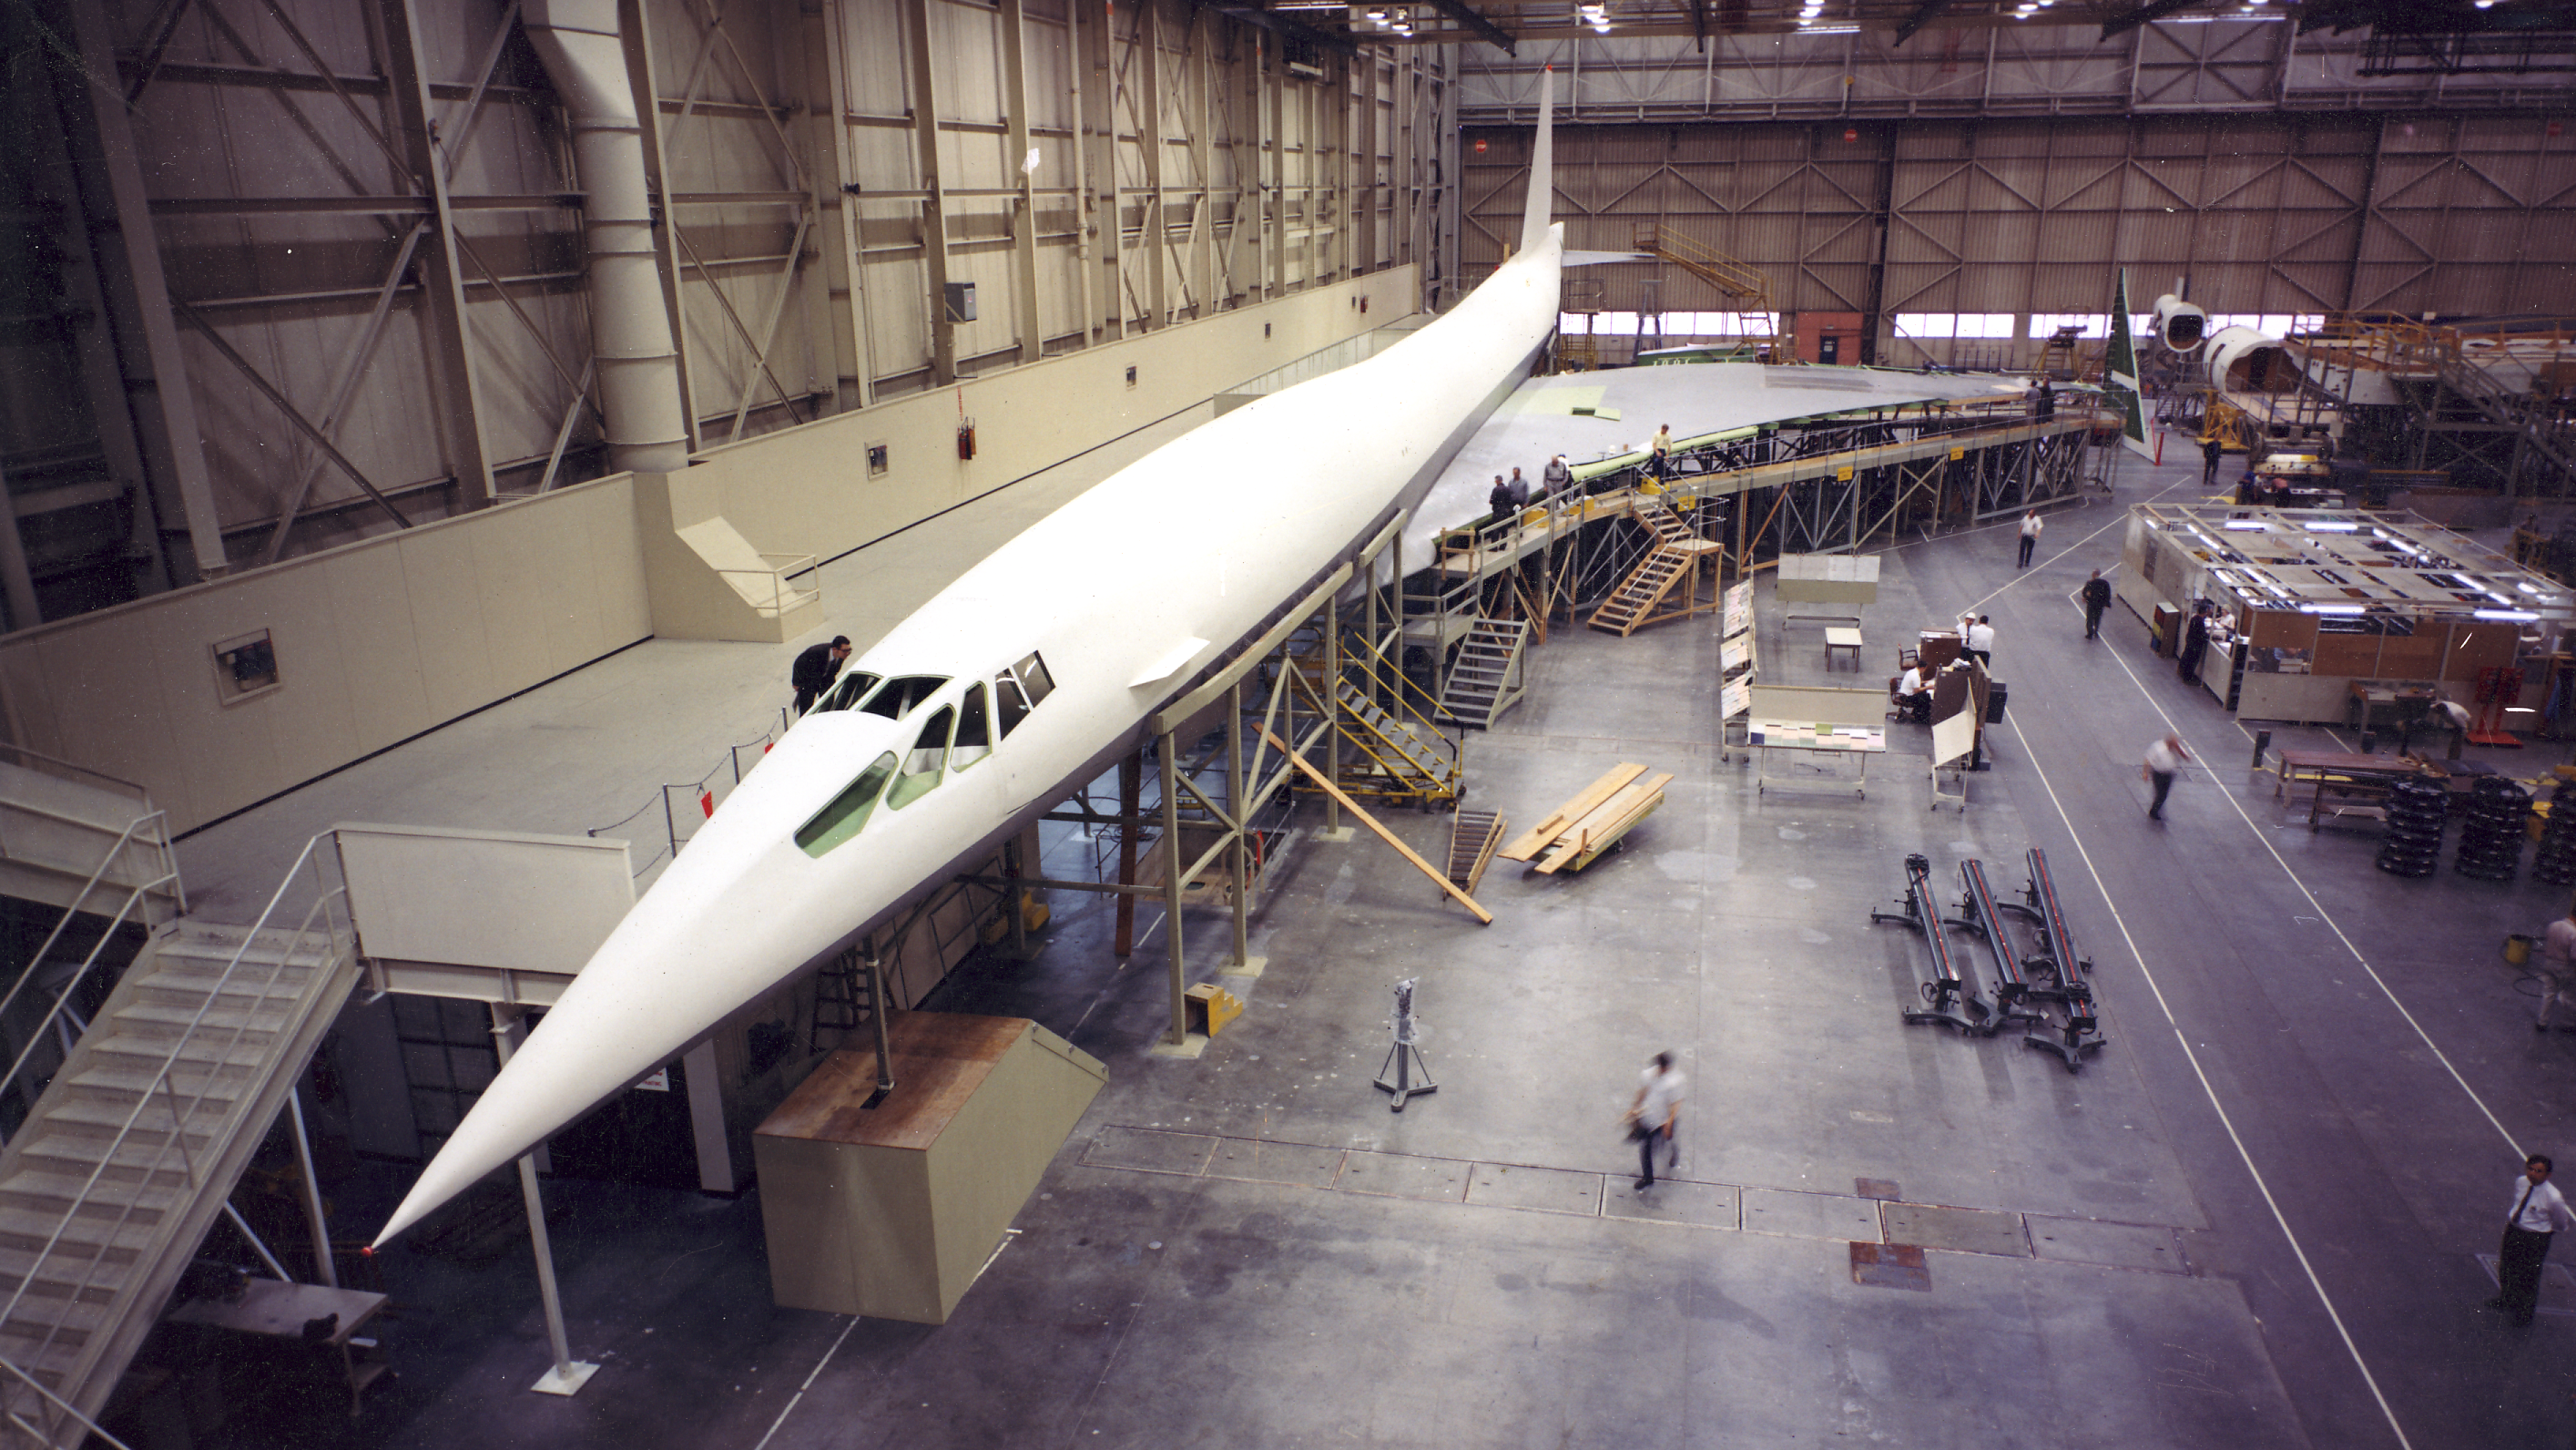 A Mock up of the Boeing 2707 SST model in the factory at Paine Field, Everett.